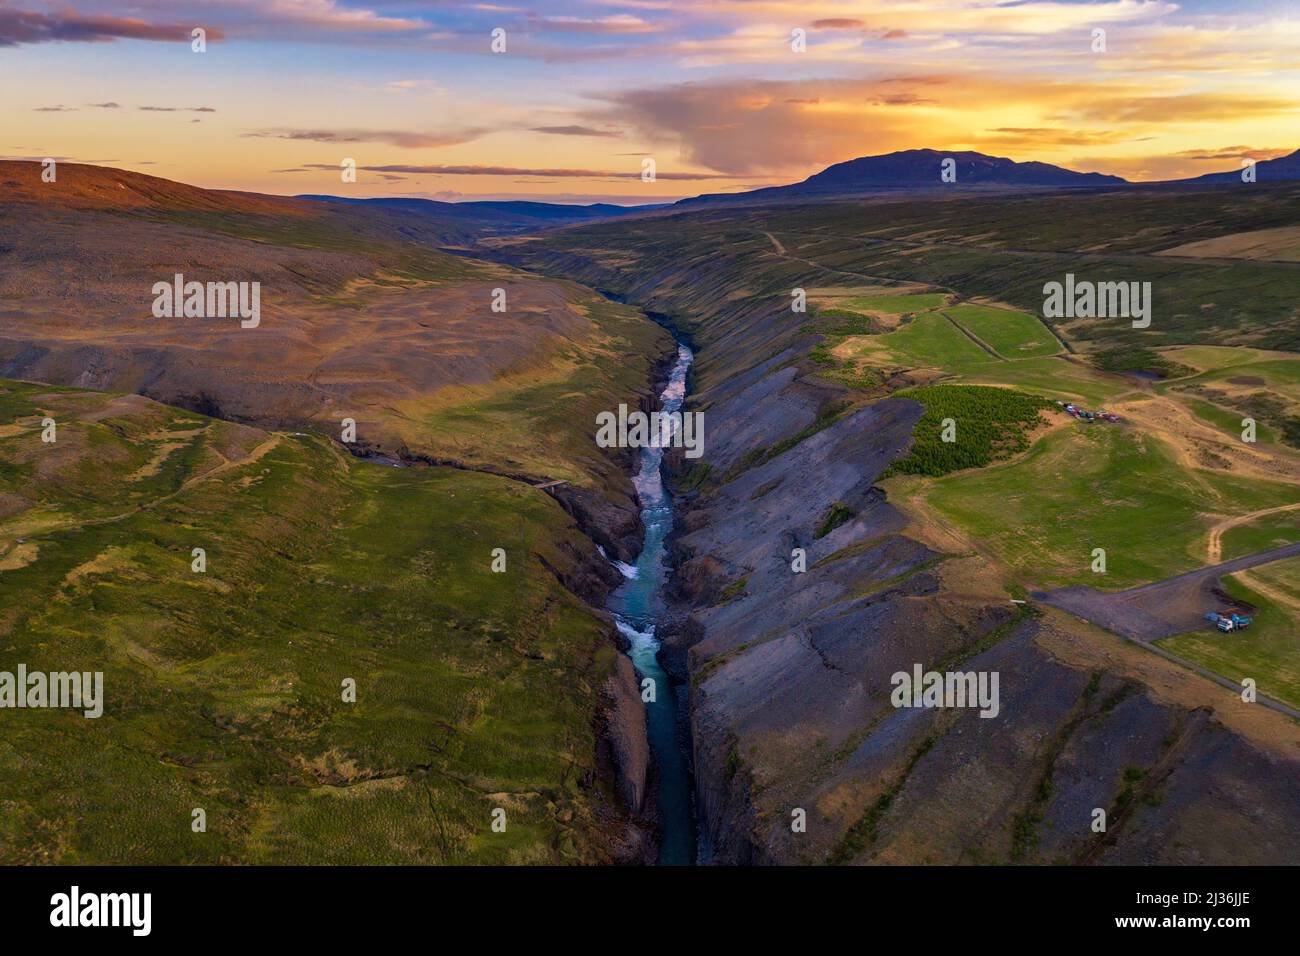 Aerial view of the Studlagil Canyon in east Iceland at sunset Stock Photo